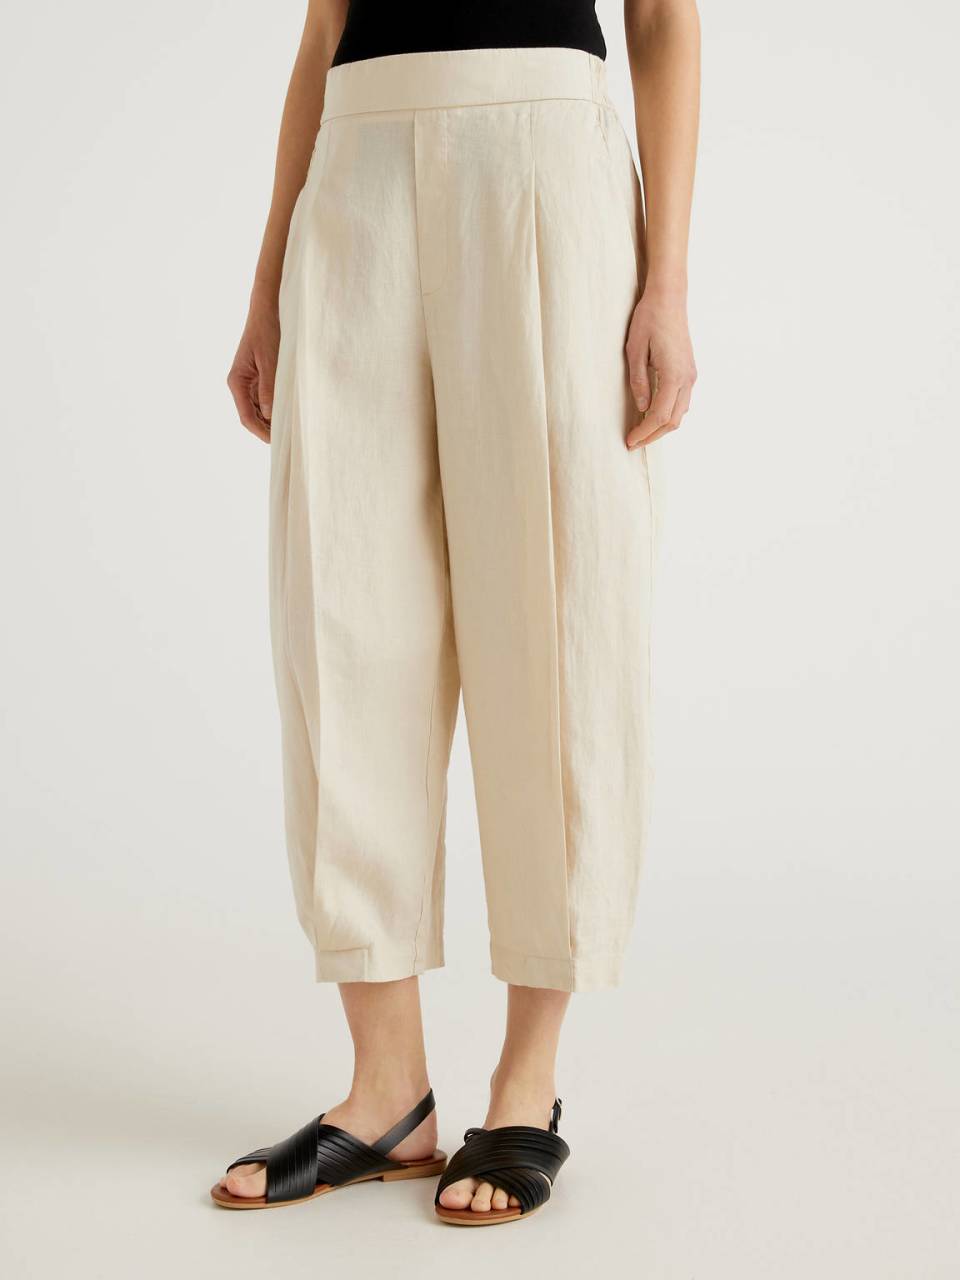 Benetton Trousers in pure linen. 1